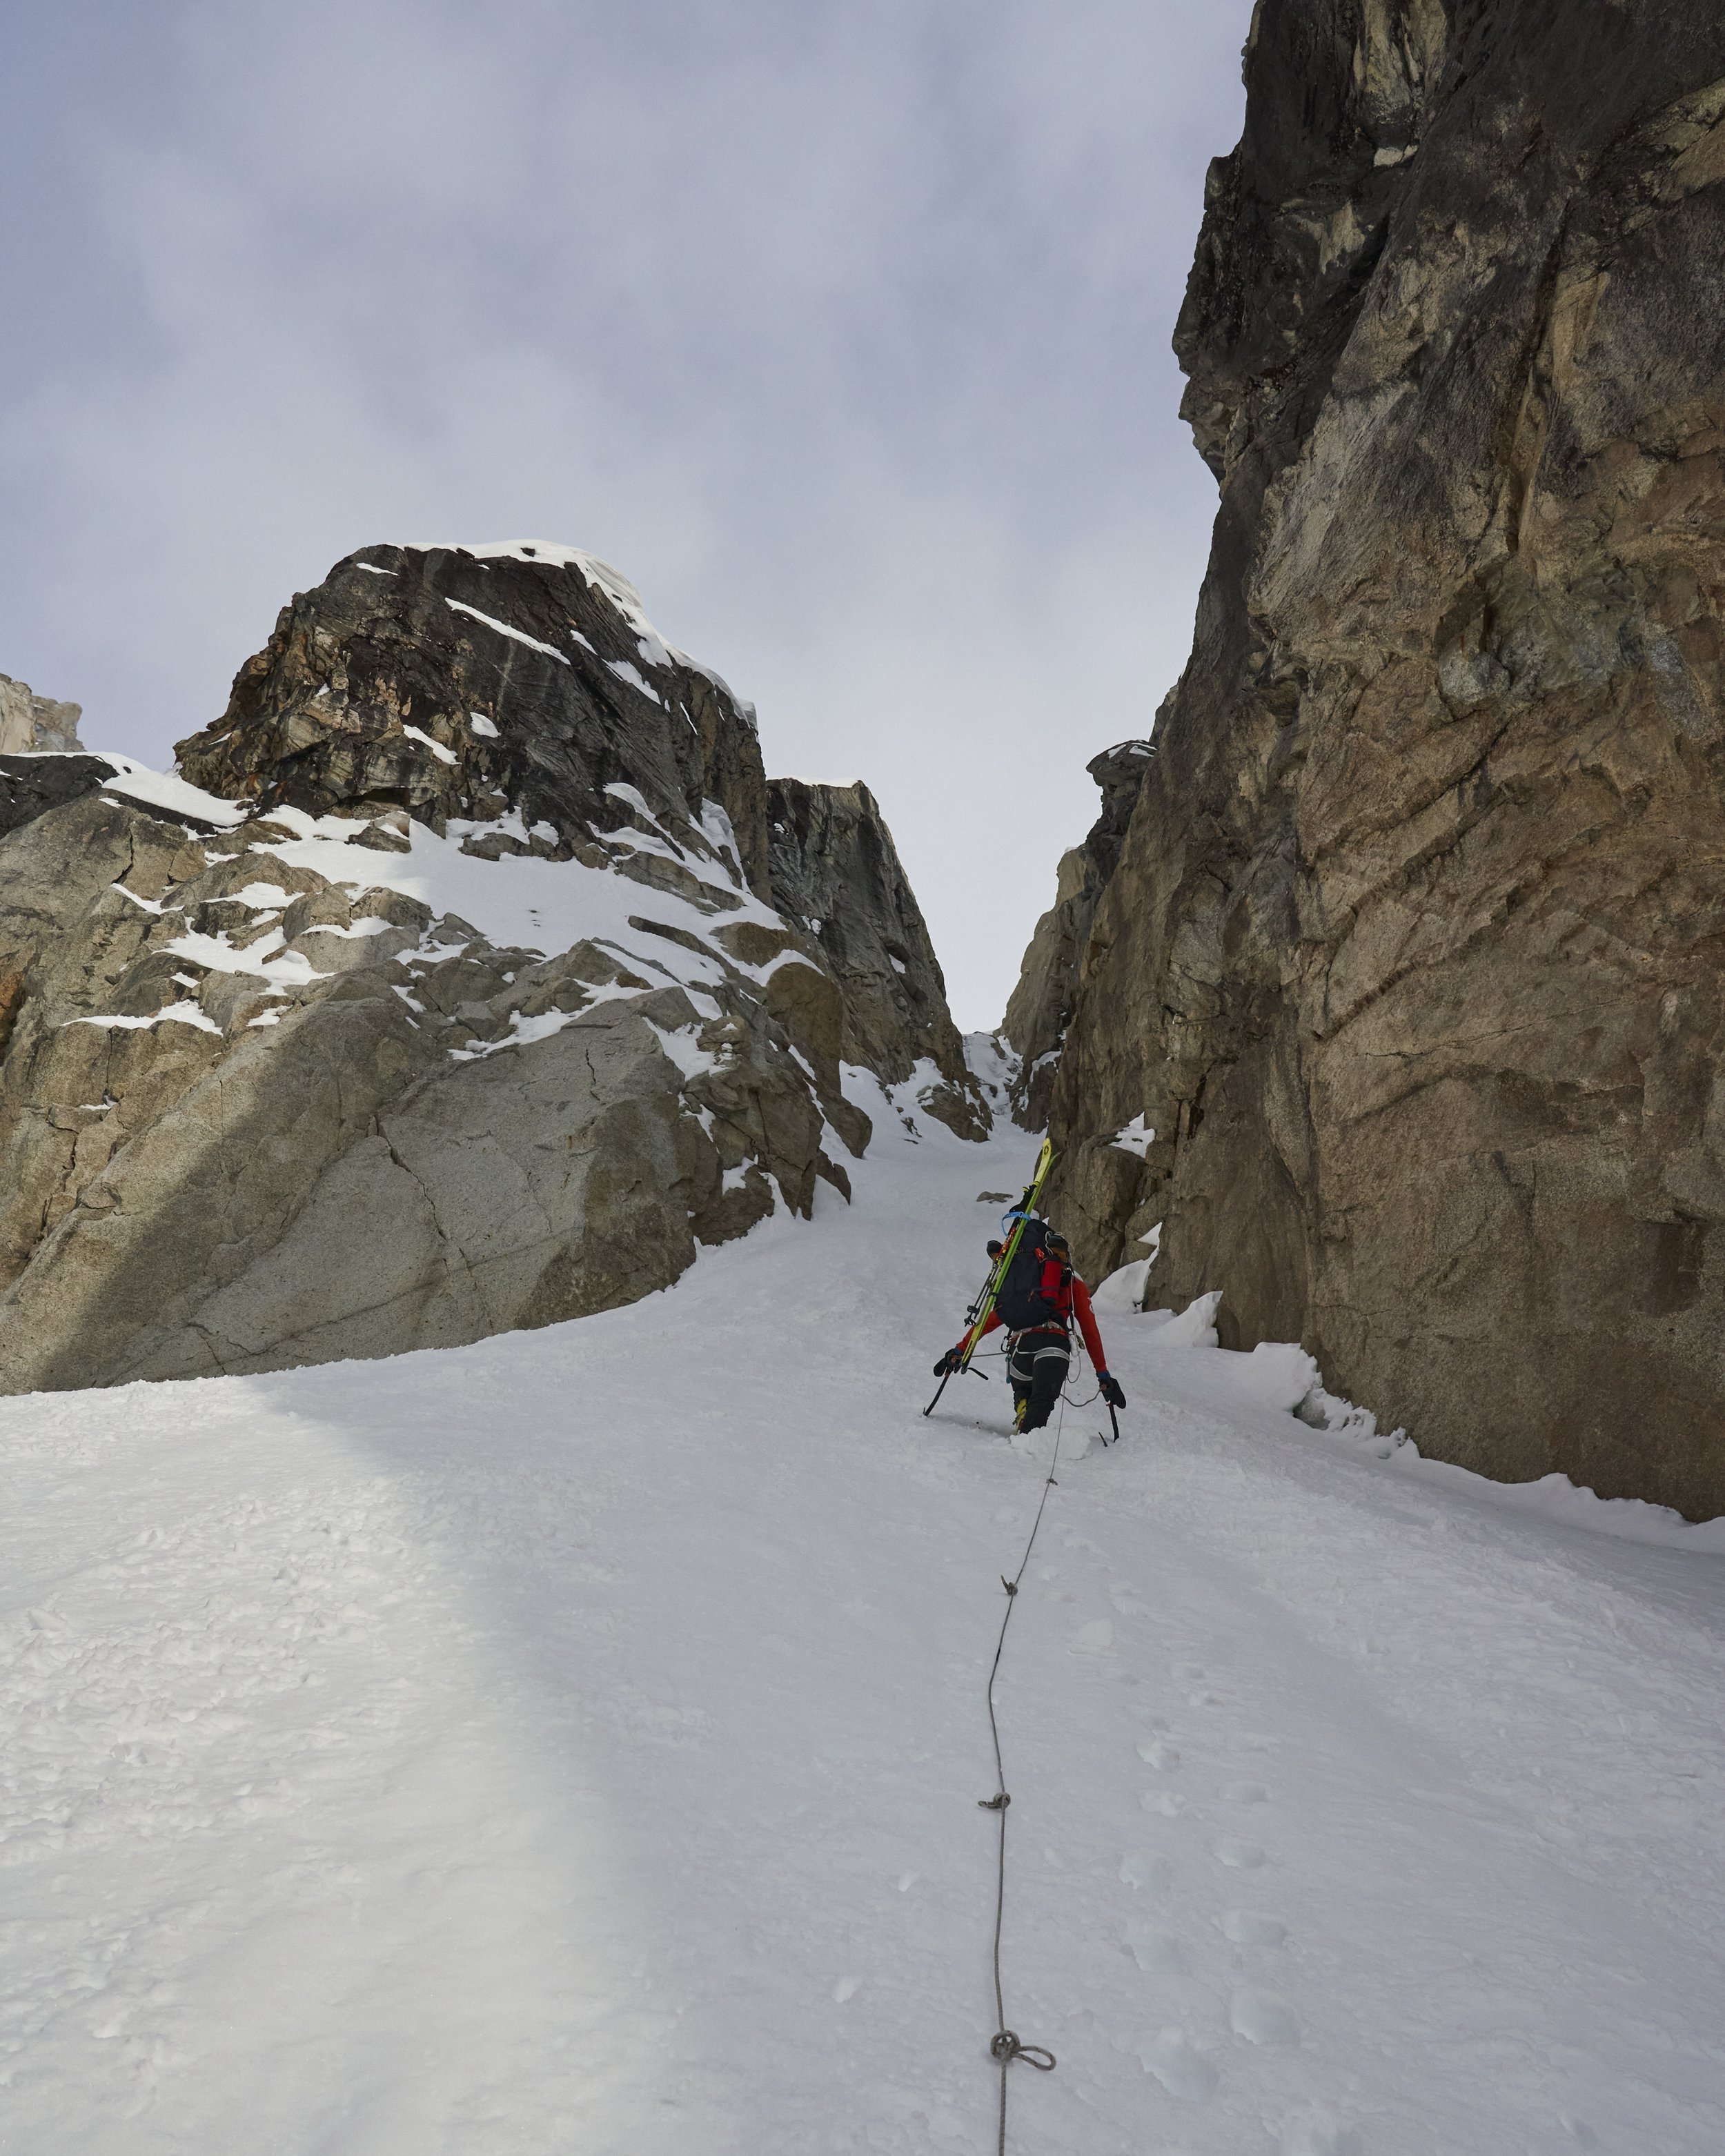 Booting up the approach couloir.